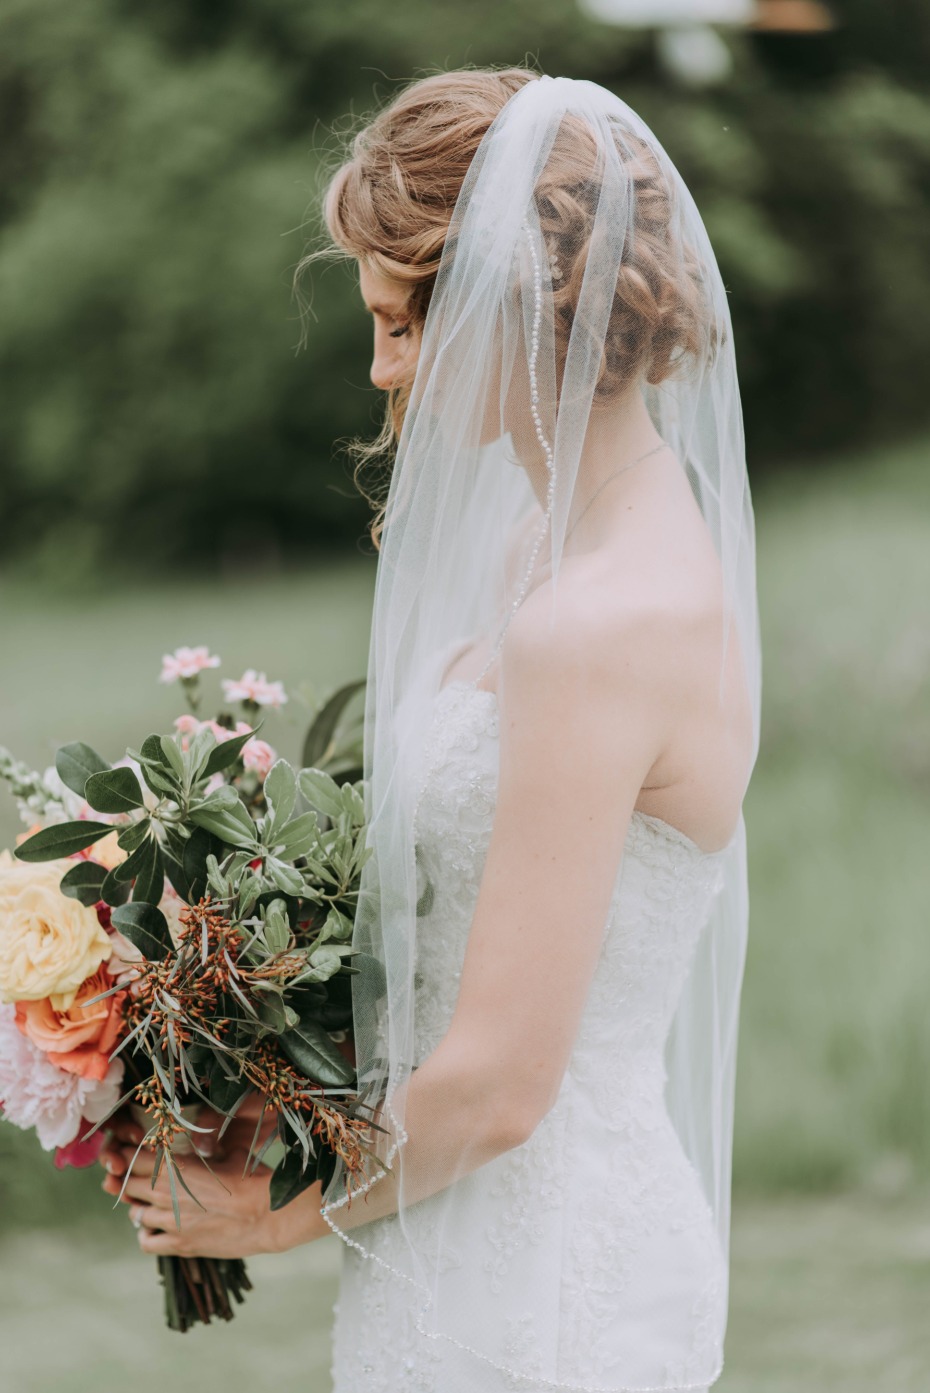 Bride looking down at her bouquet with veil on